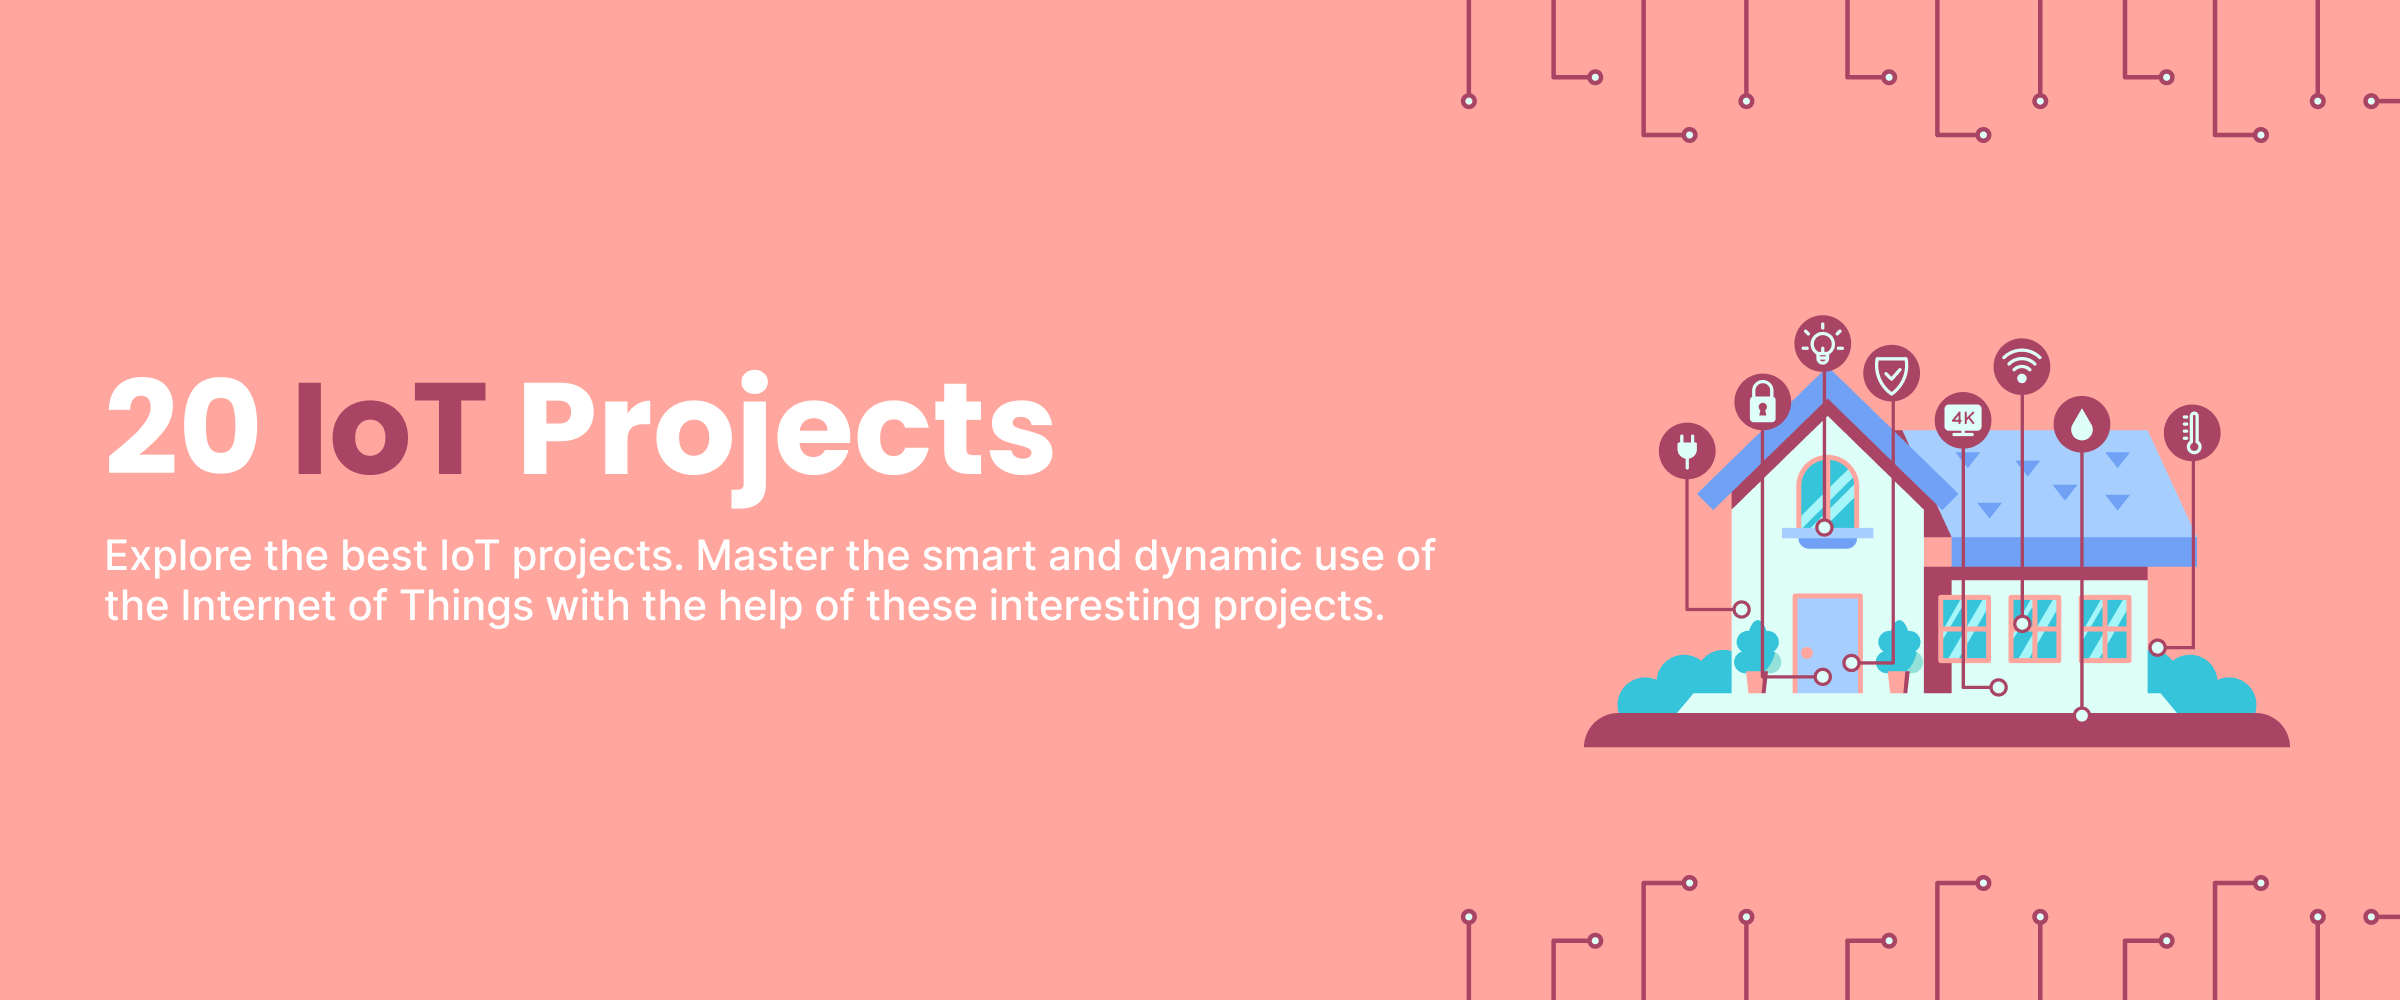 IOT Projects